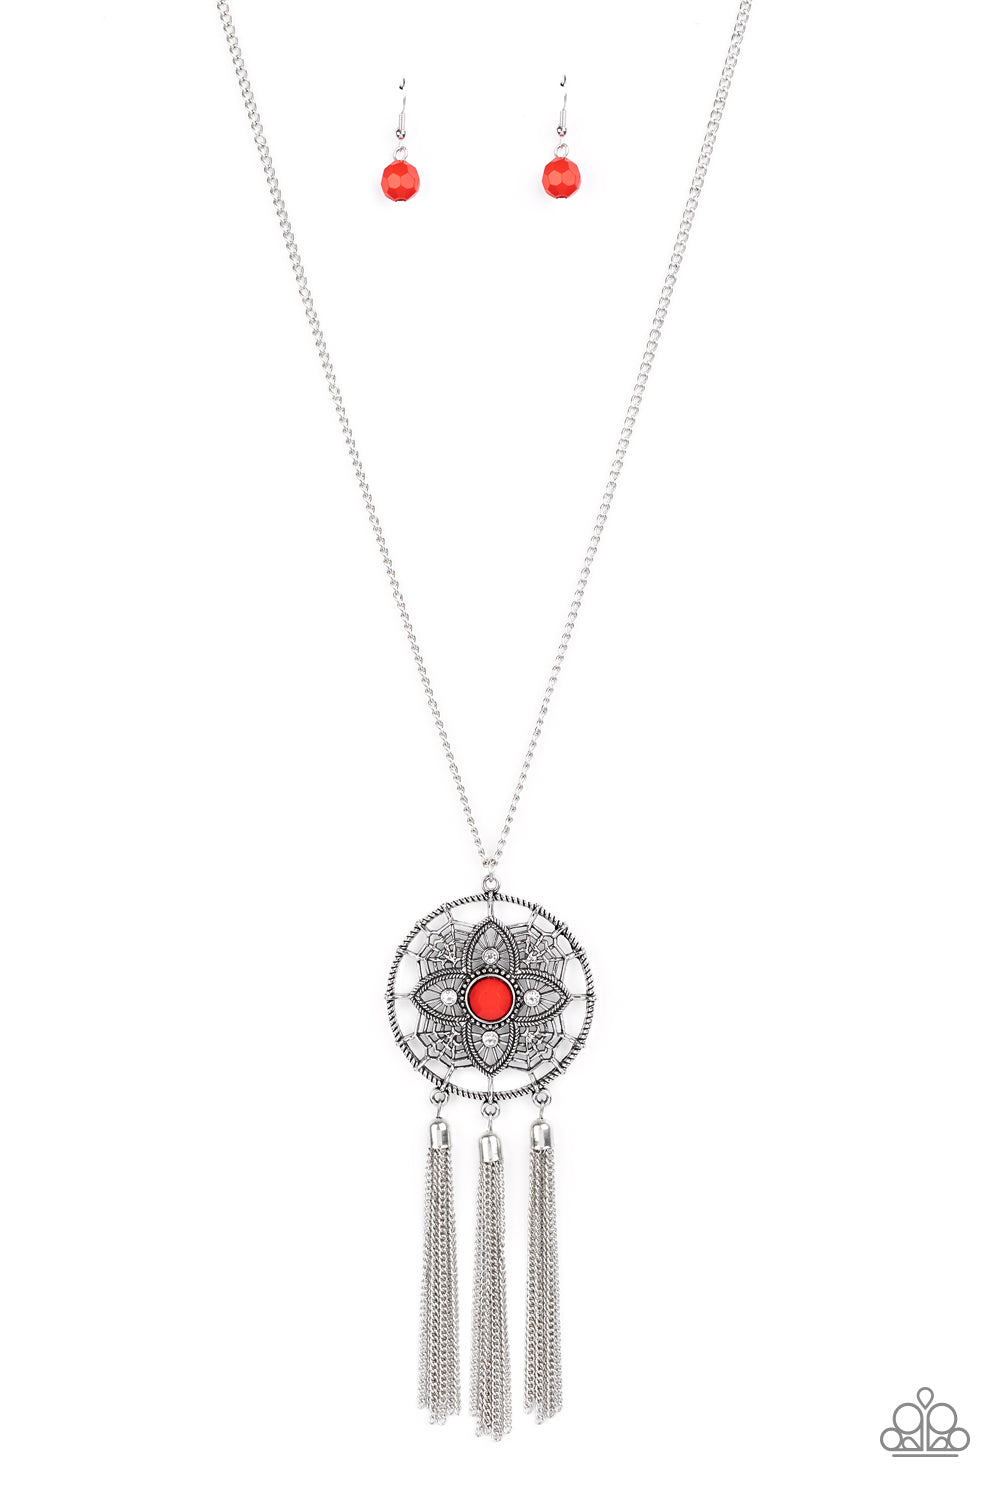 Chasing Dreams Necklace (Red, Yellow)